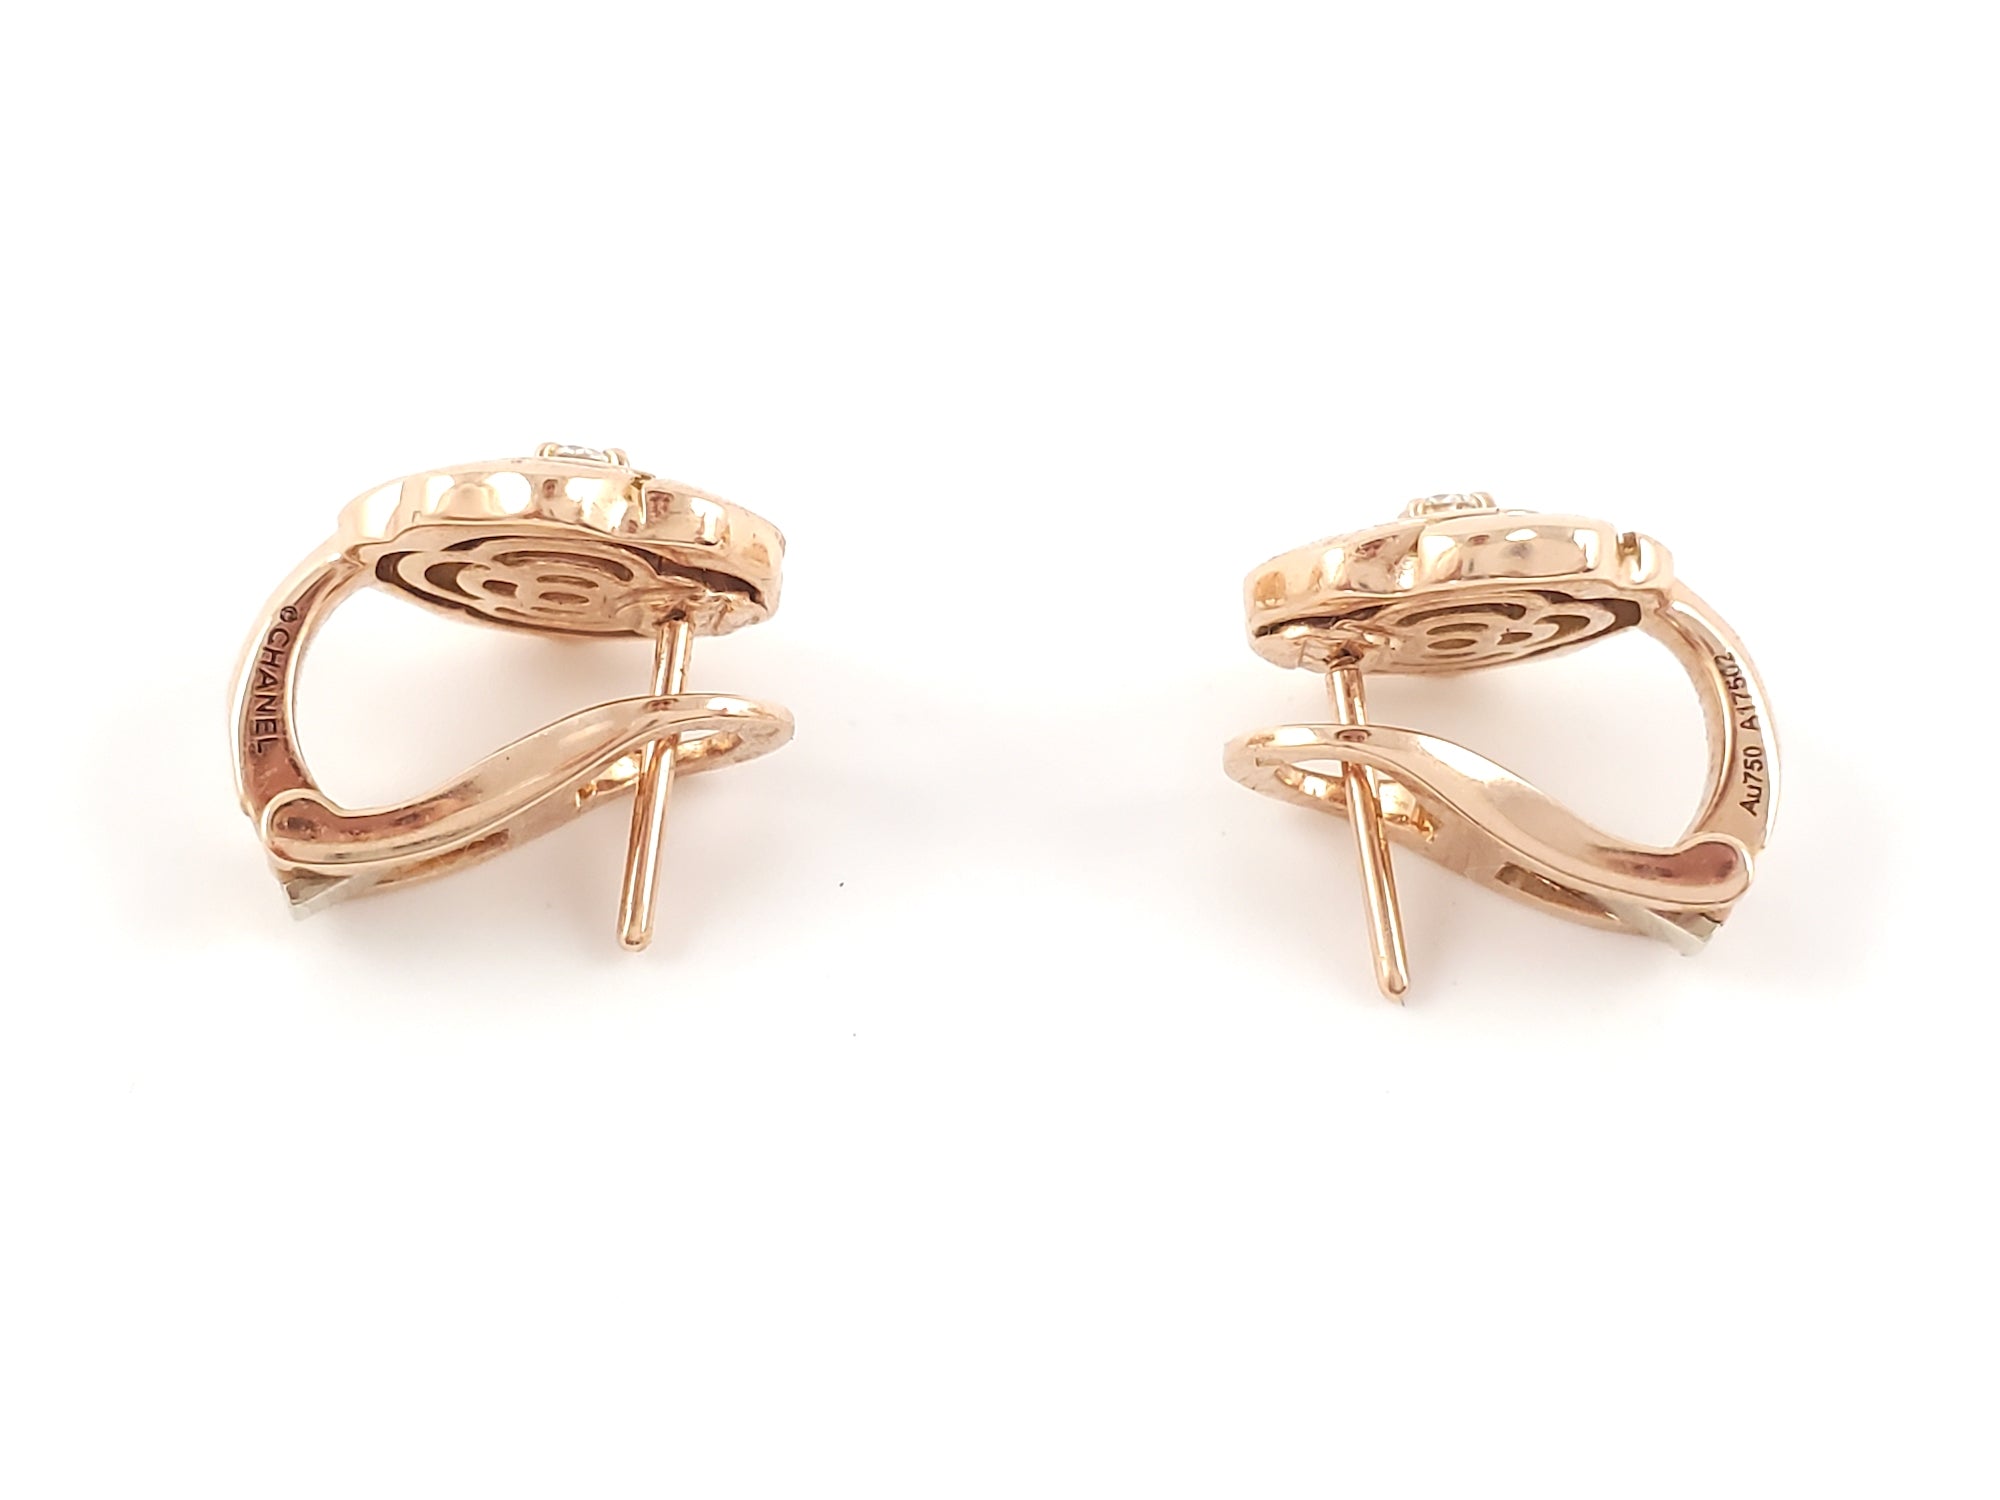 Details more than 64 rose gold chanel earrings best